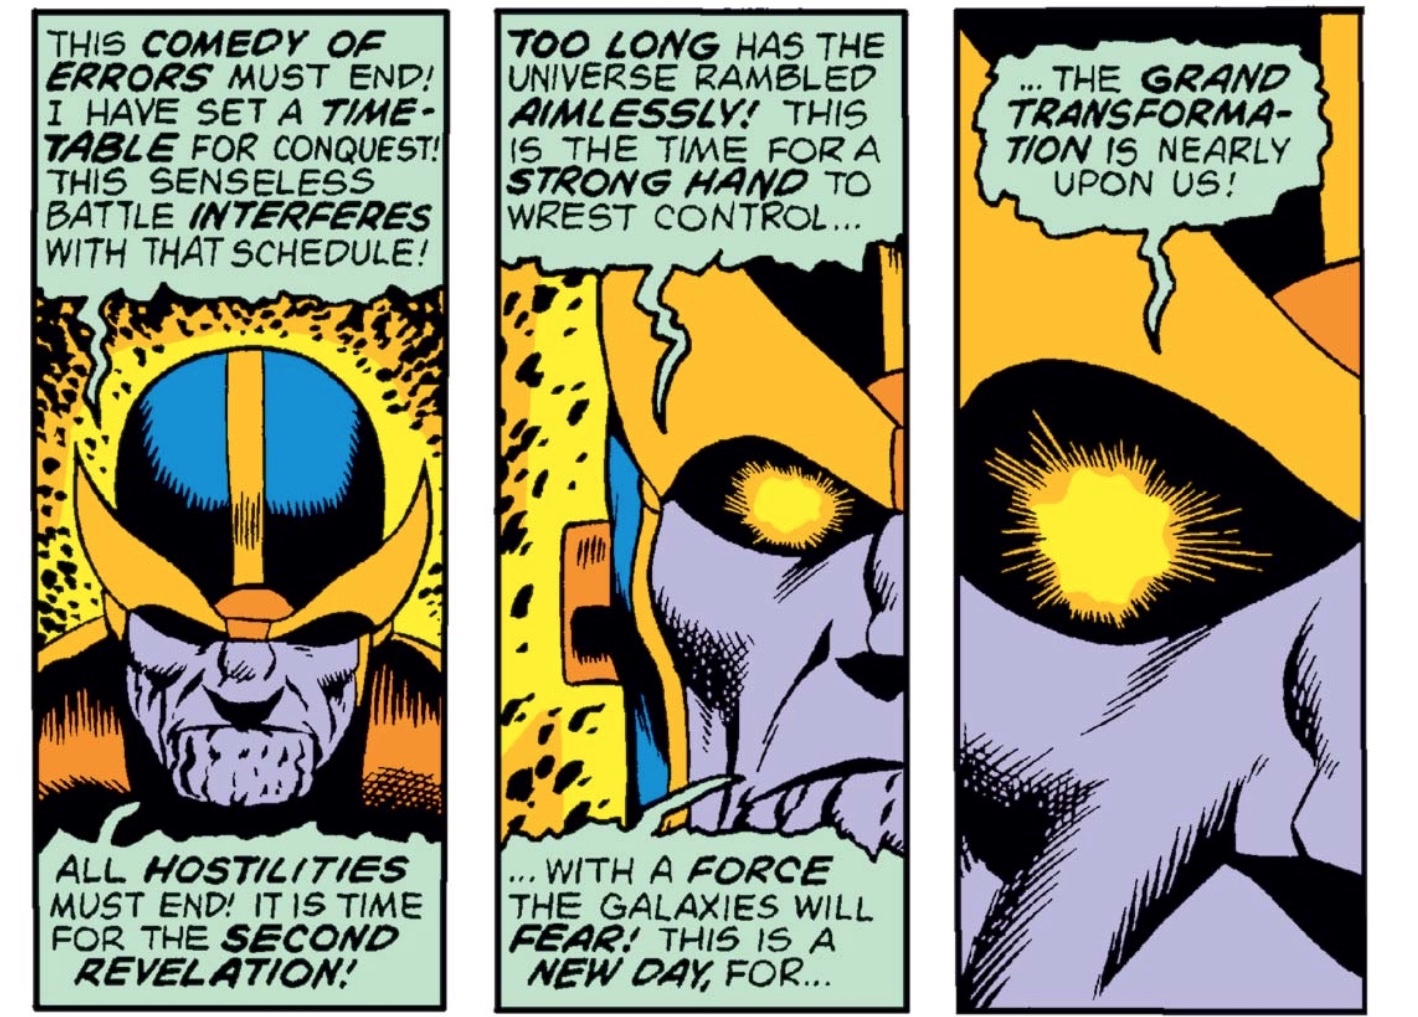 3 panels of Thanos puling in tight on his right eye as he monologues about ‘the Second Revelation’ and ‘Grand Transformation!’